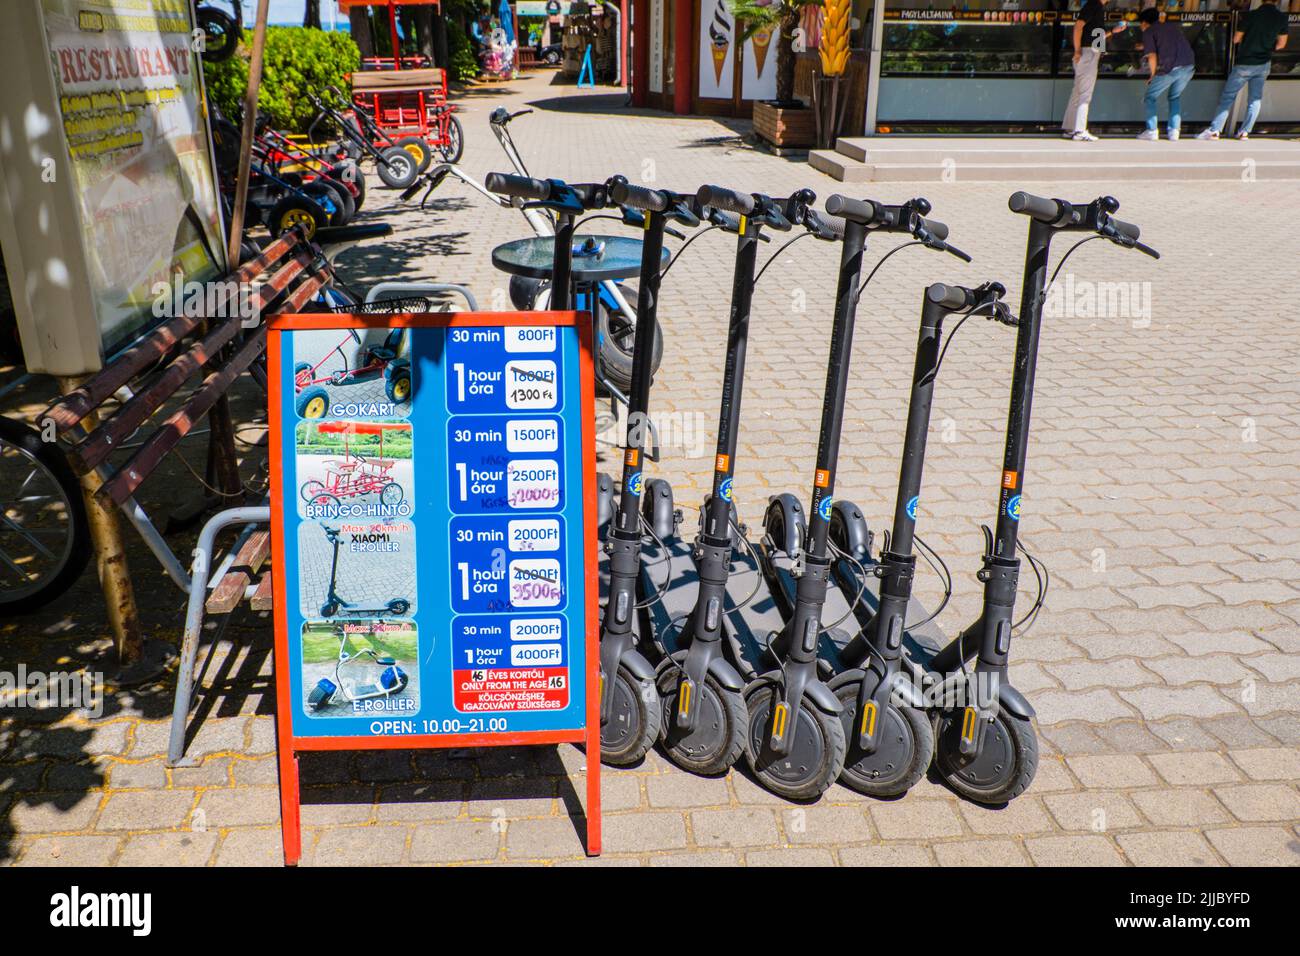 Electronic scooters and otherr modes of light transport for rent, Petőfi sétány, main pedestrian street by the beach, Siofok, Hungary Stock Photo